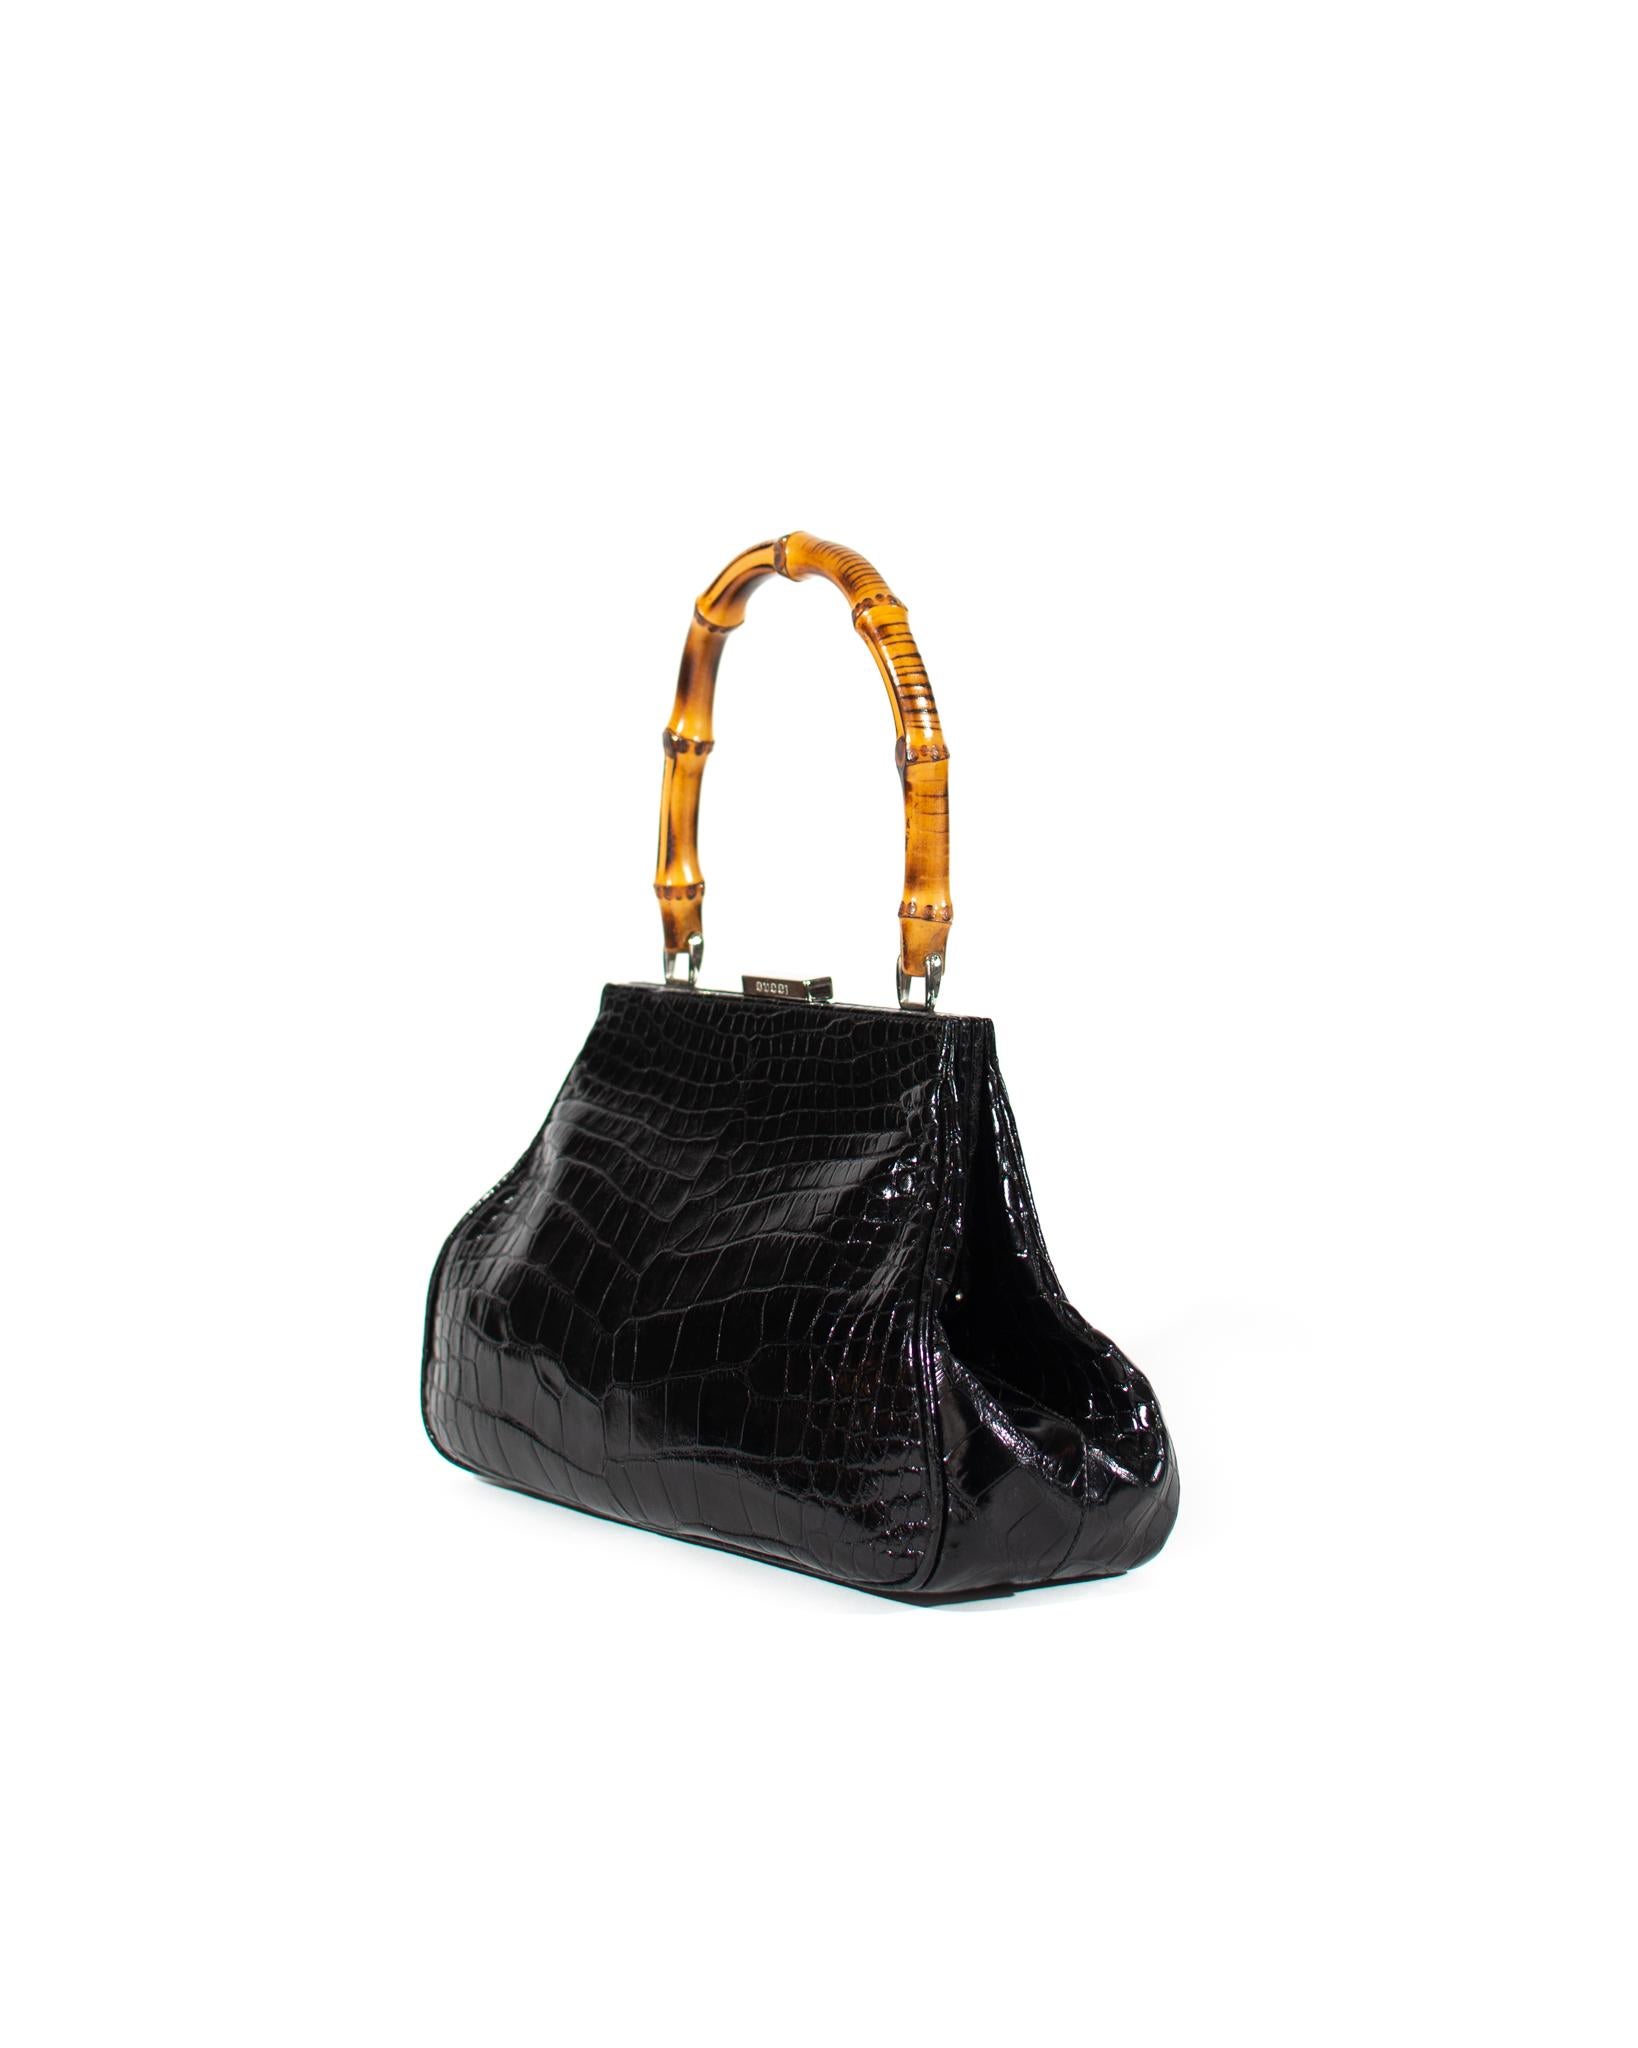 Presenting No one knows how to sell sexy better than designer Tom Ford. This bag embodies his dedication to elevating classic designs and adding his thoughtful and sleek touches. This bag boasts a stunning black alligator leather body with a silver